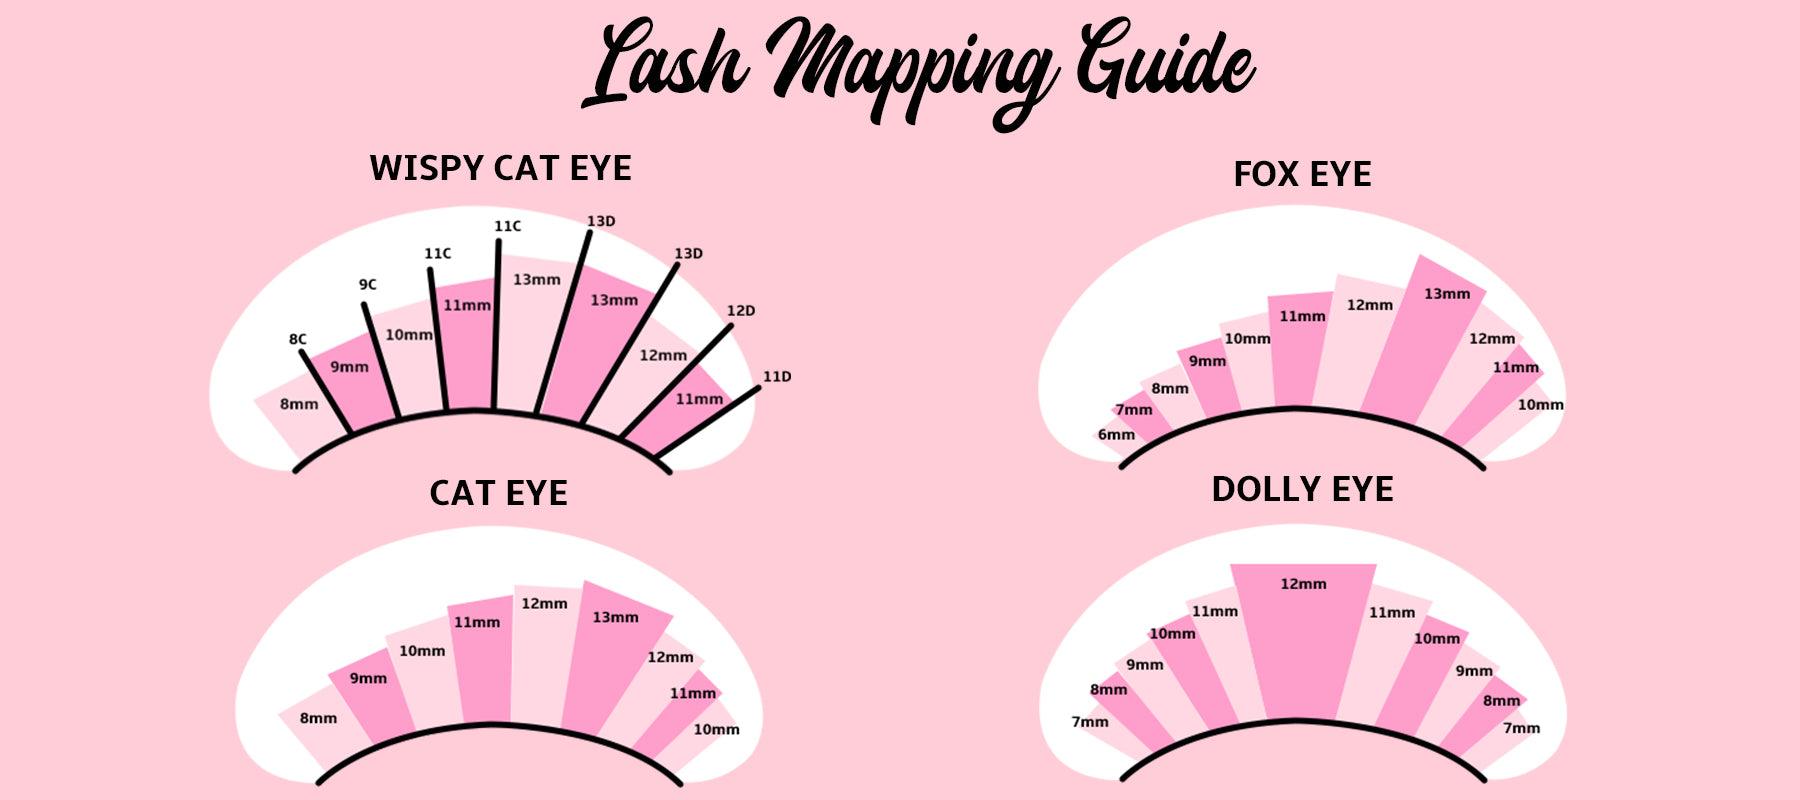 LASH MAPPING GUIDE - VAVALASH